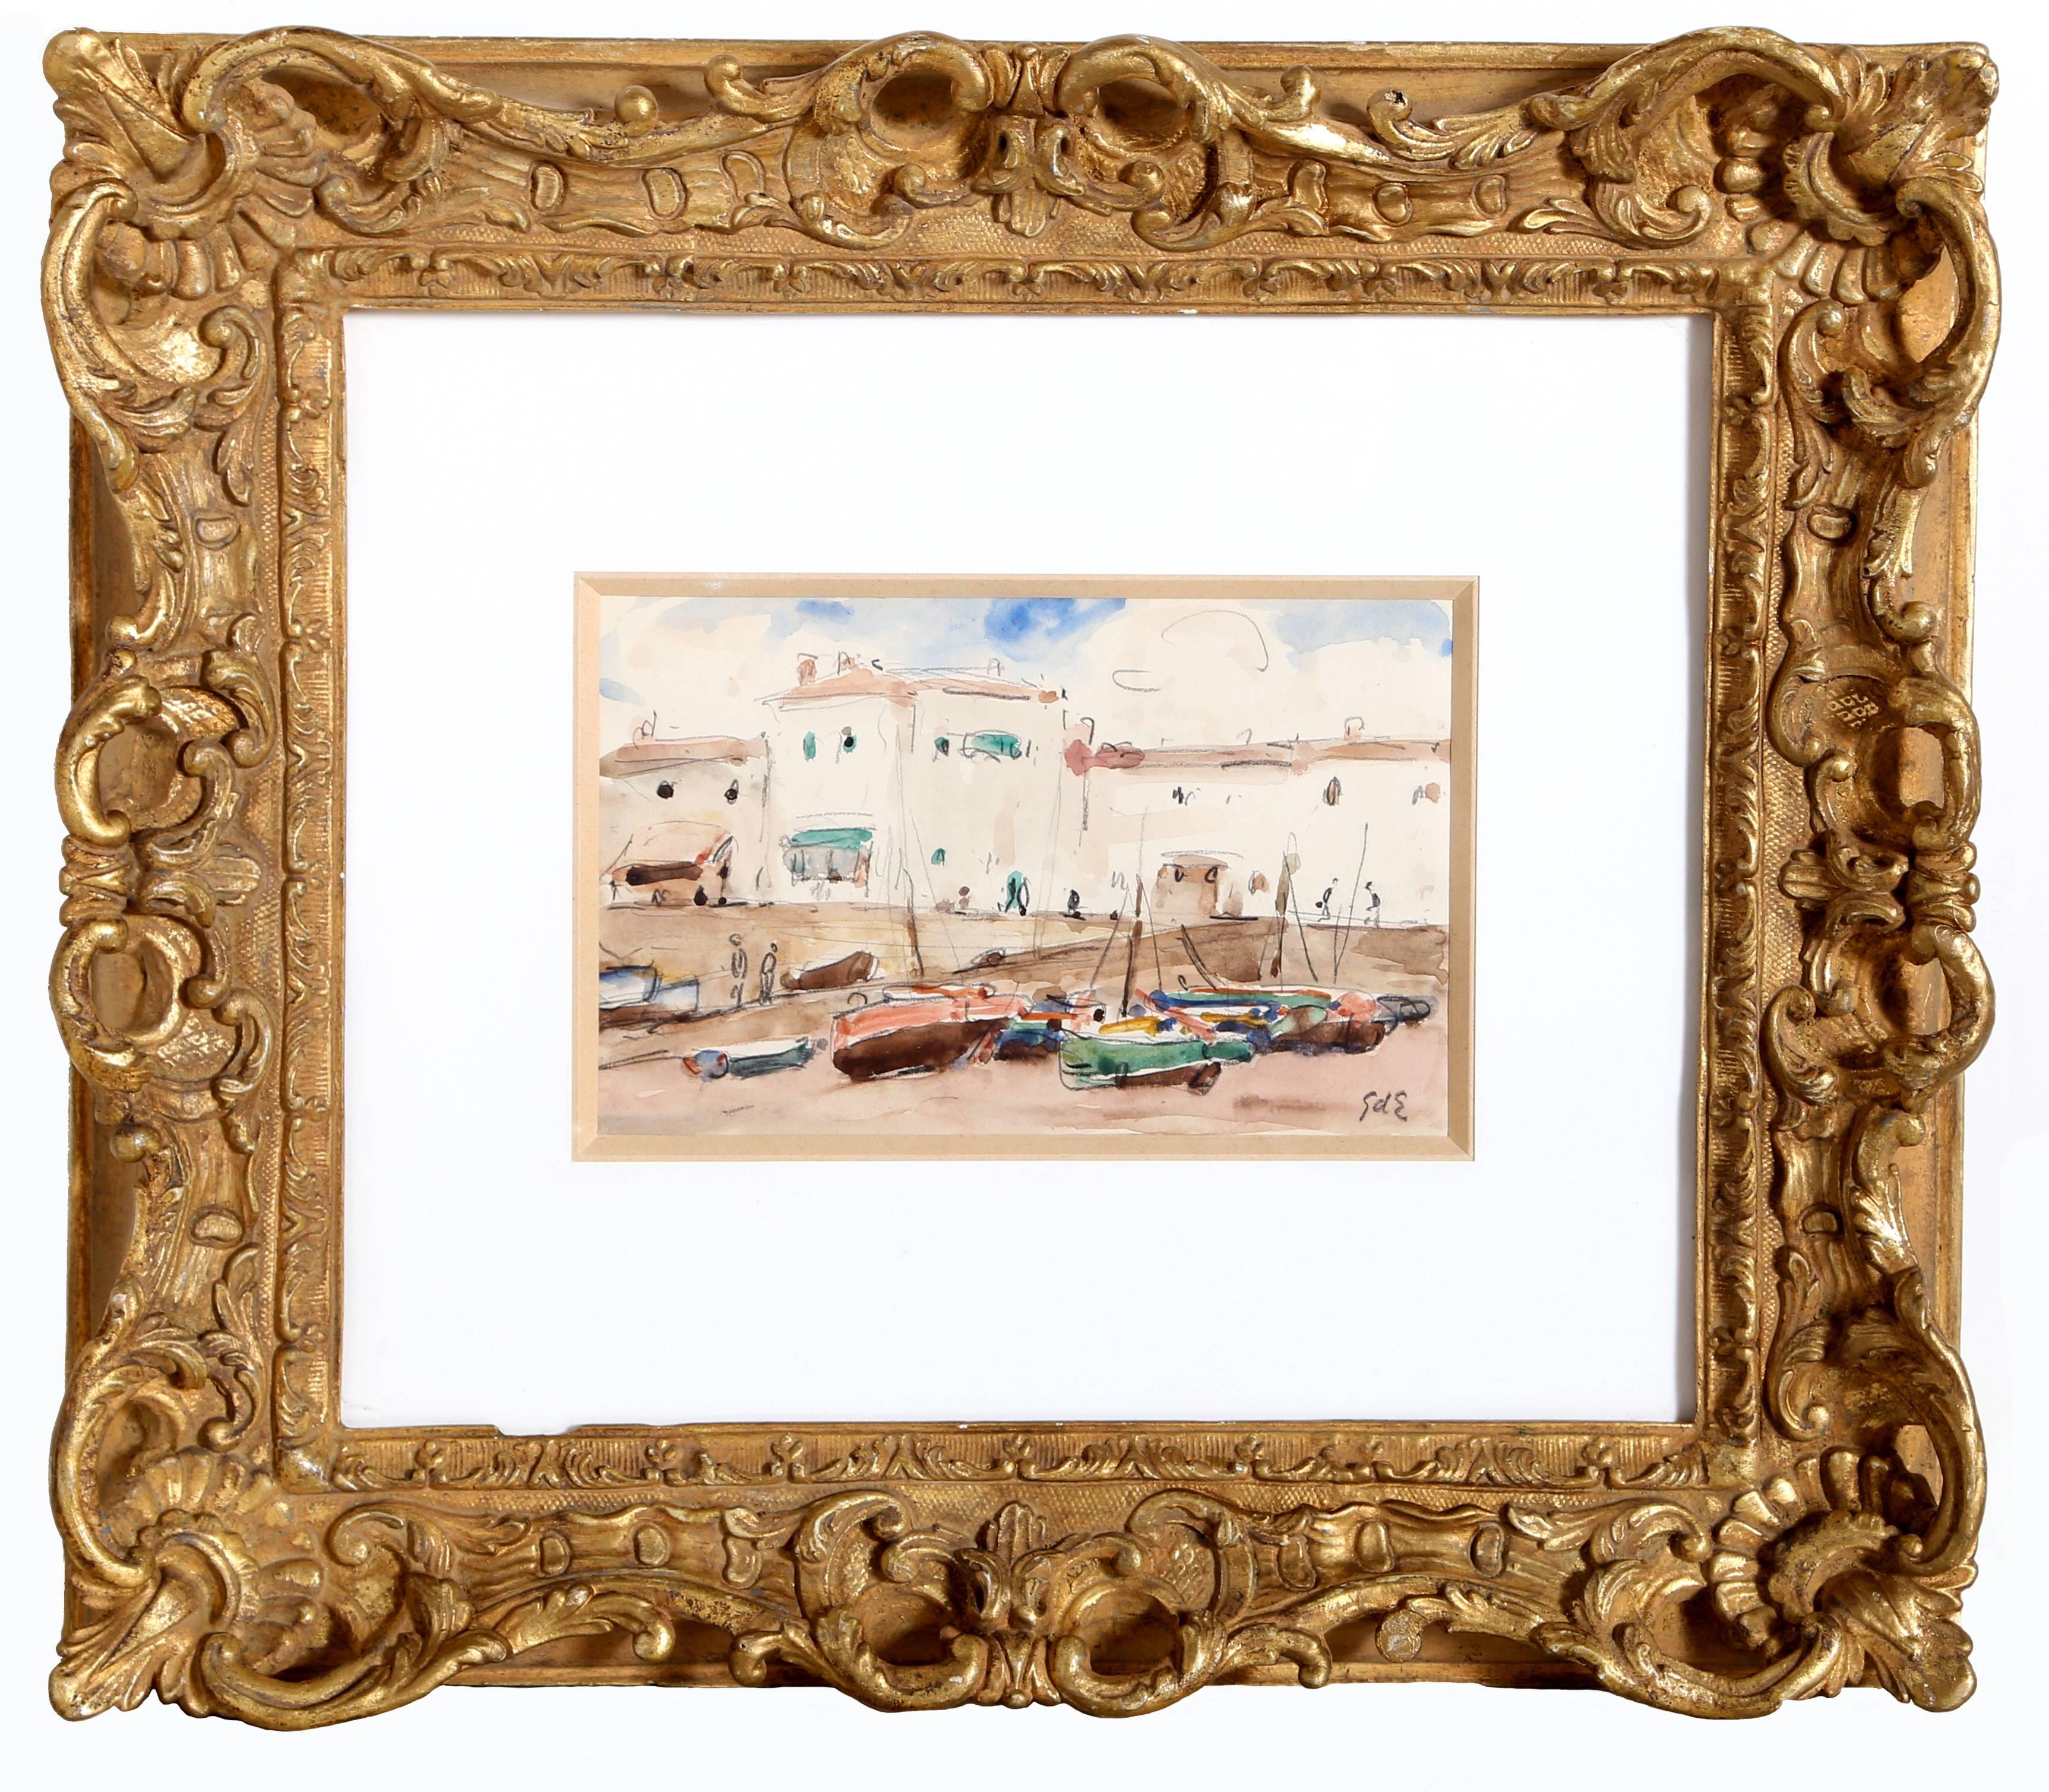 Boats on the Shore, Watercolor Painting circa 1910 by Georges d'Espagnat